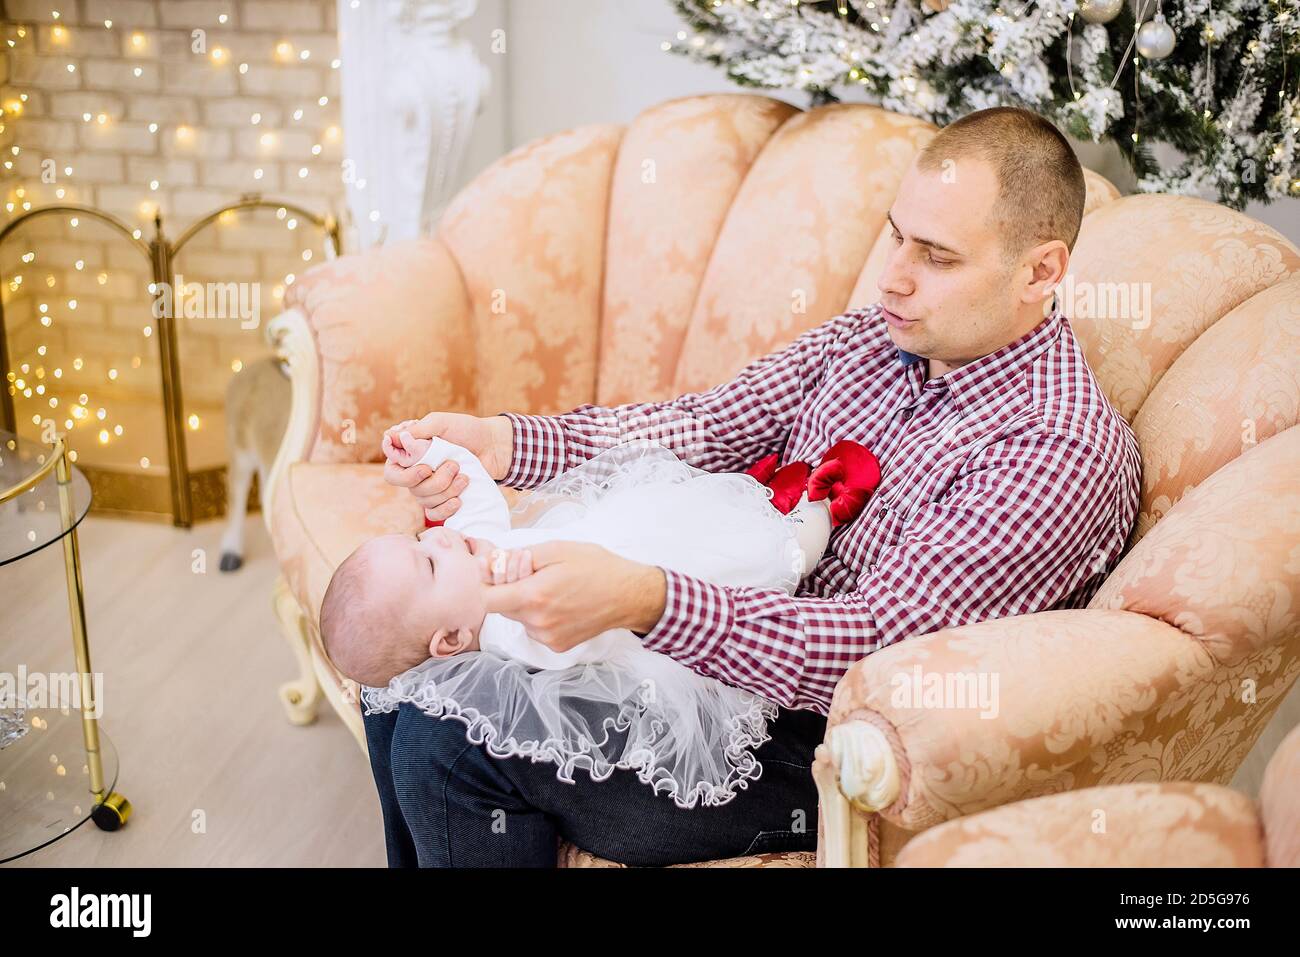 A young man holds a baby in his arms. Father plays with a girl in a white dress, hugs her, kisses against the background of festive Christmas trees Stock Photo